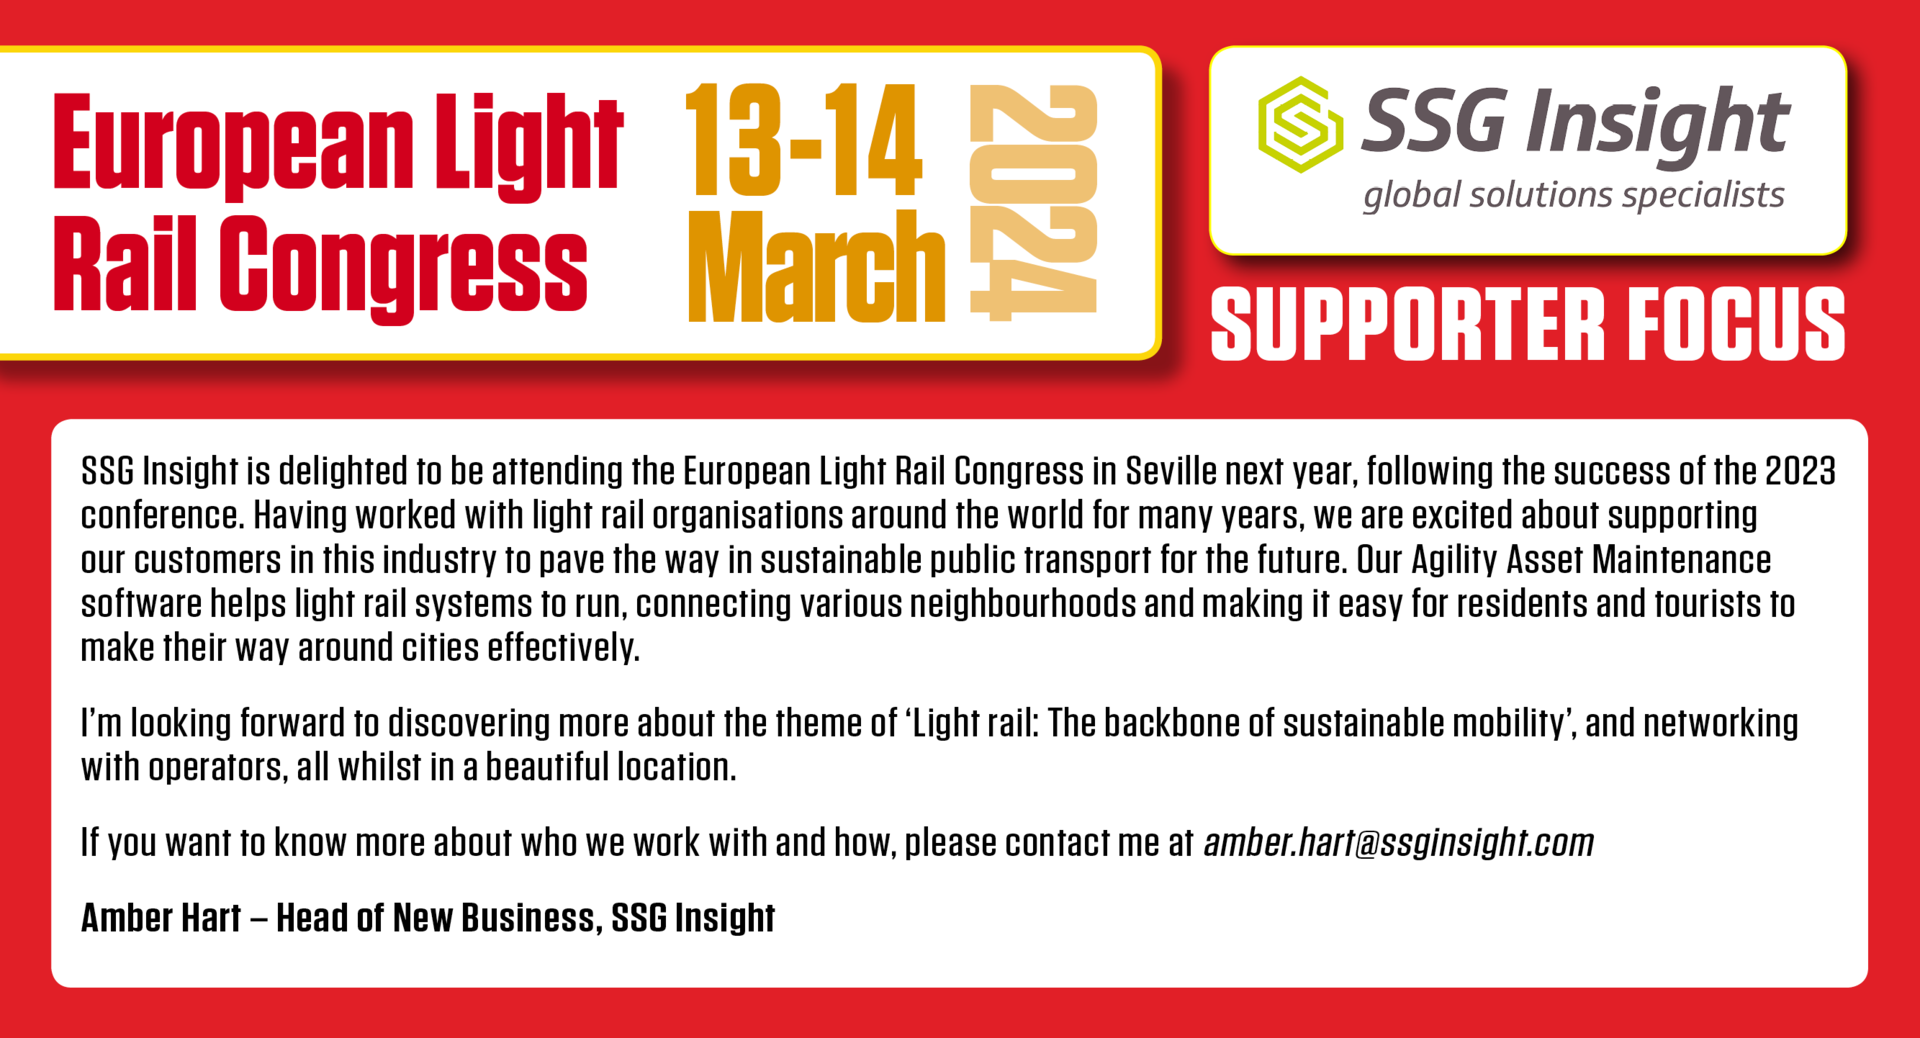 2024 European Light Rail Congress will be held in Seville on 13/14 March 2024